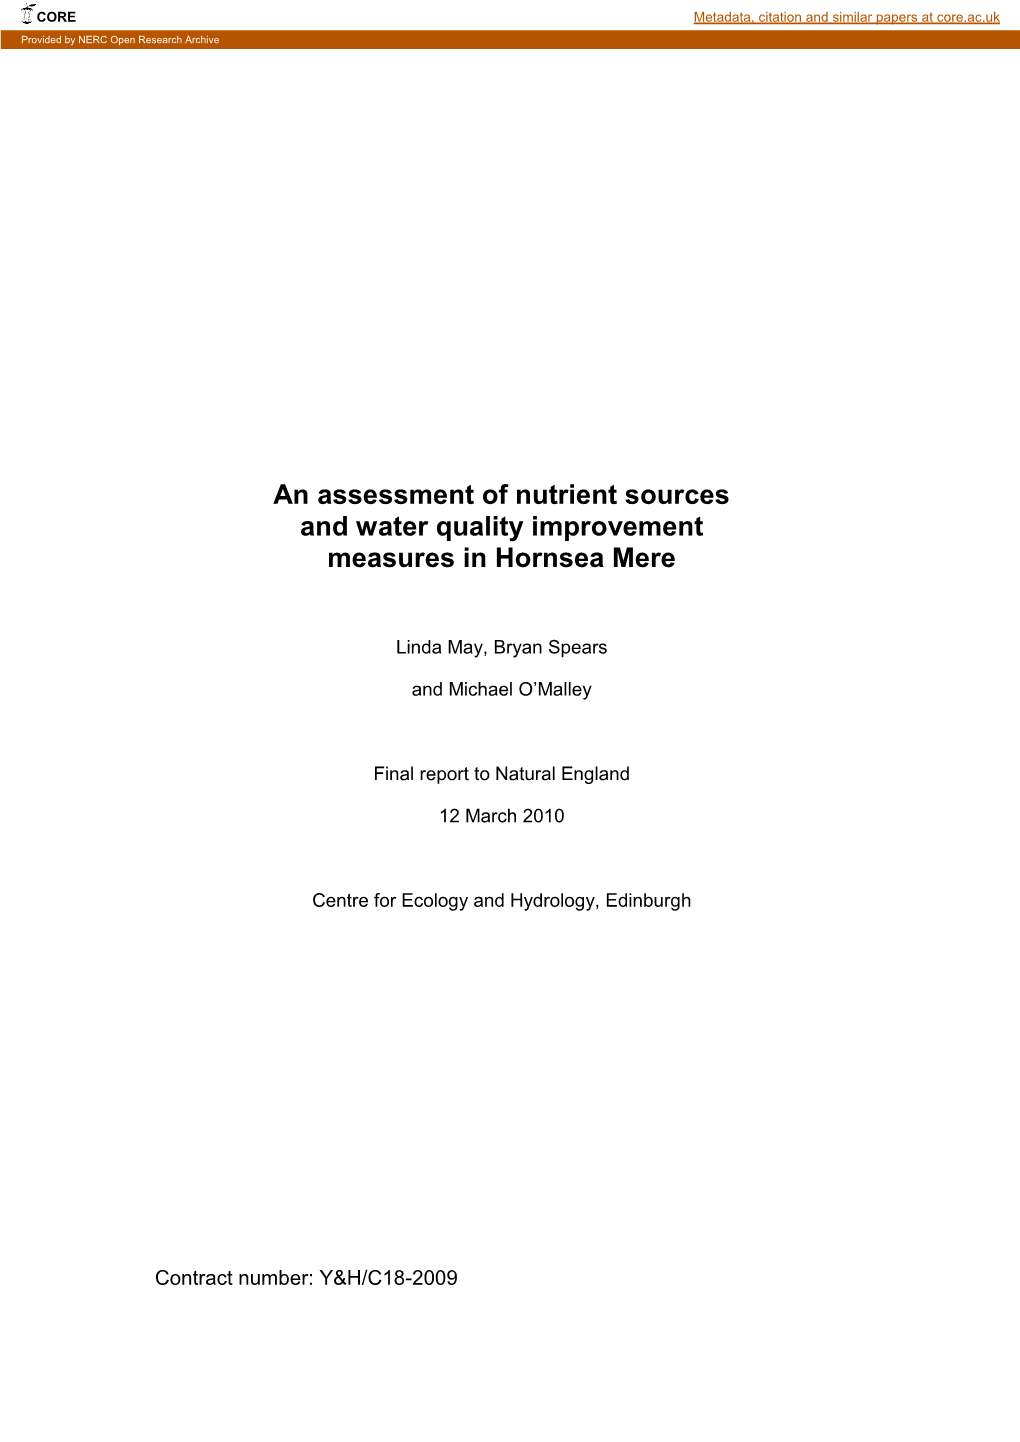 An Assessment of Nutrient Sources and Water Quality Improvement Measures in Hornsea Mere